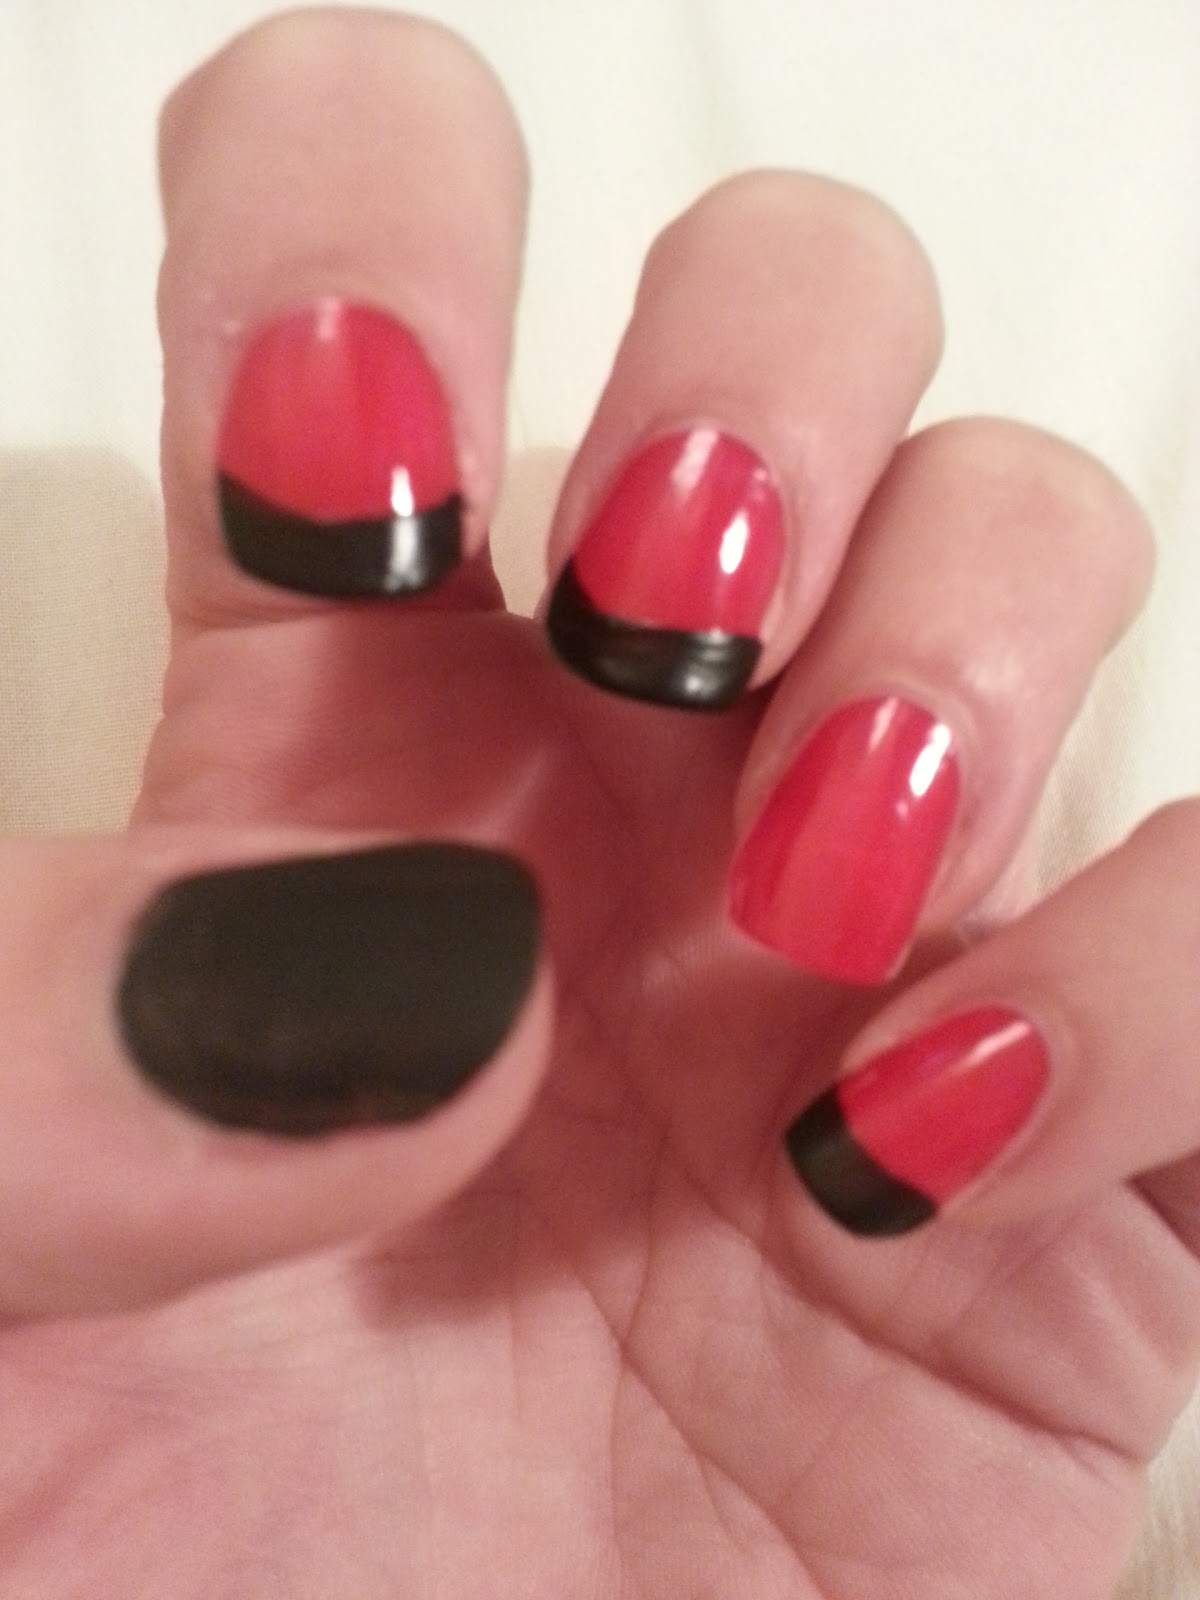 Source URL: http://kootation.com/red-nails-with-black-french-tips-and ...